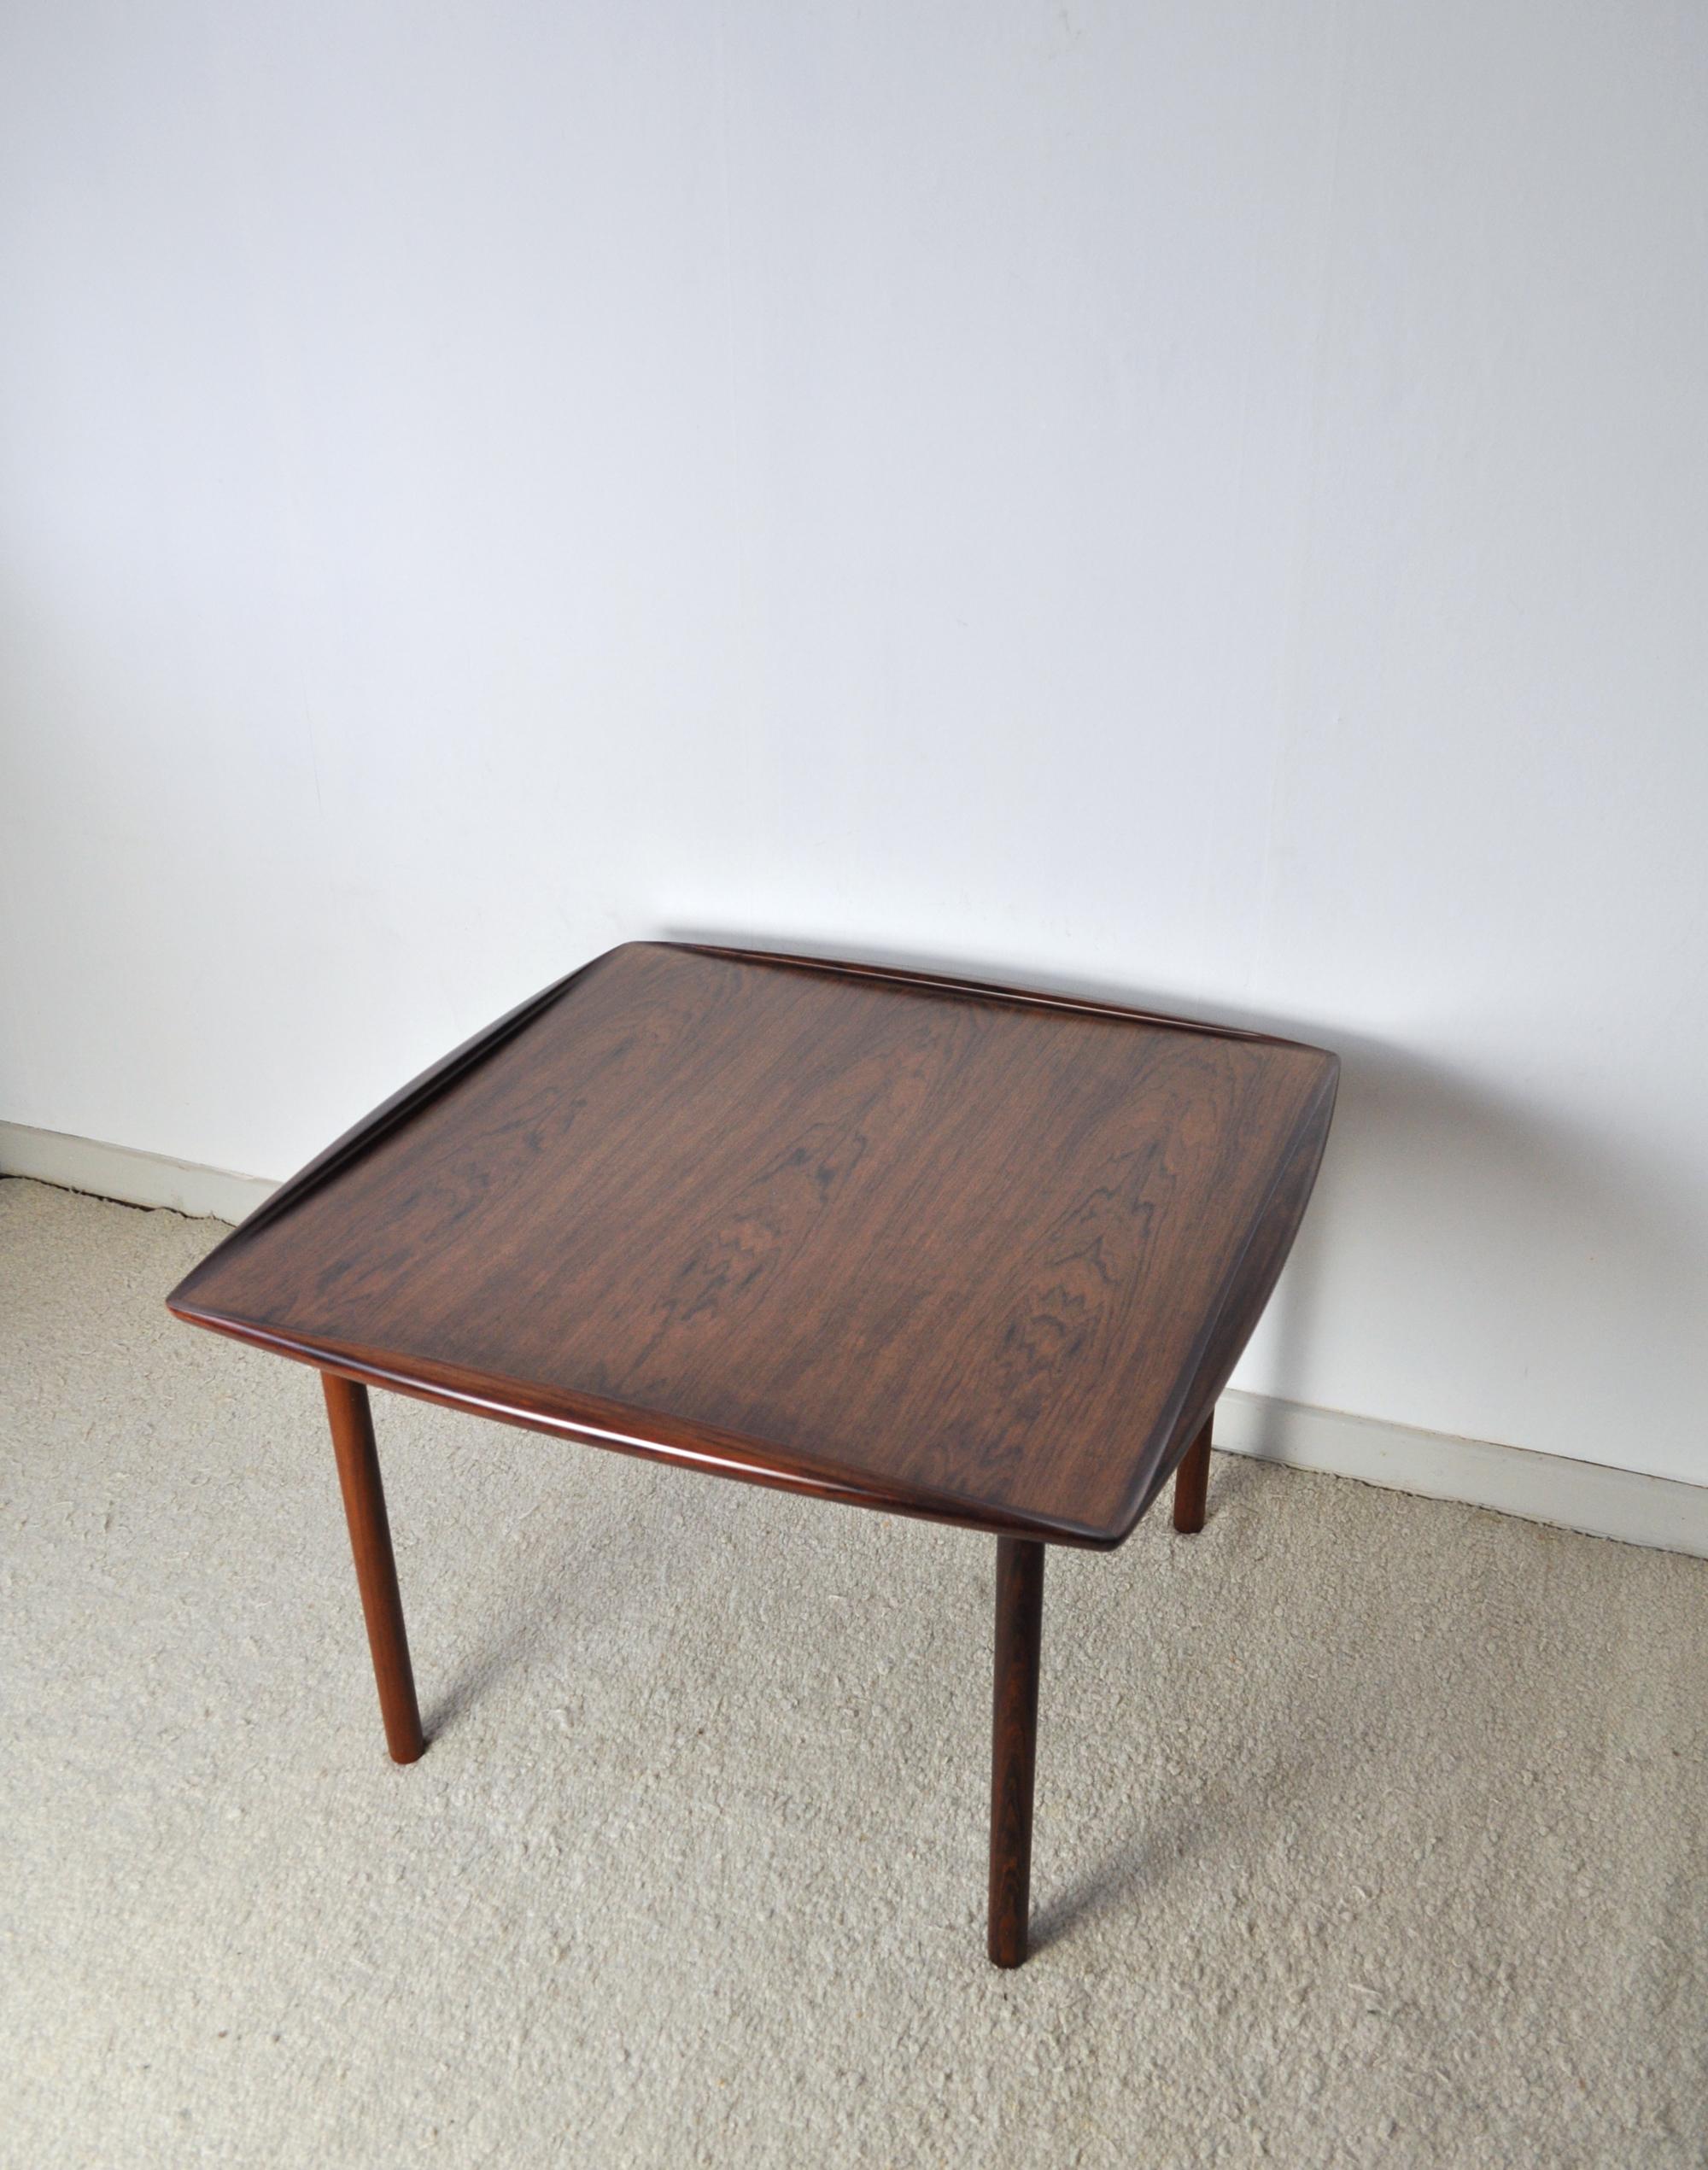 Rare rosewood coffee table designed by Grete Jalk 1959 for P. Jeppesens Møbelfabrik, model G J 108.
Stunning finish with turned edges. Excellent and restored condition.
Labeled by maker and Danish Furniture makers control.
 